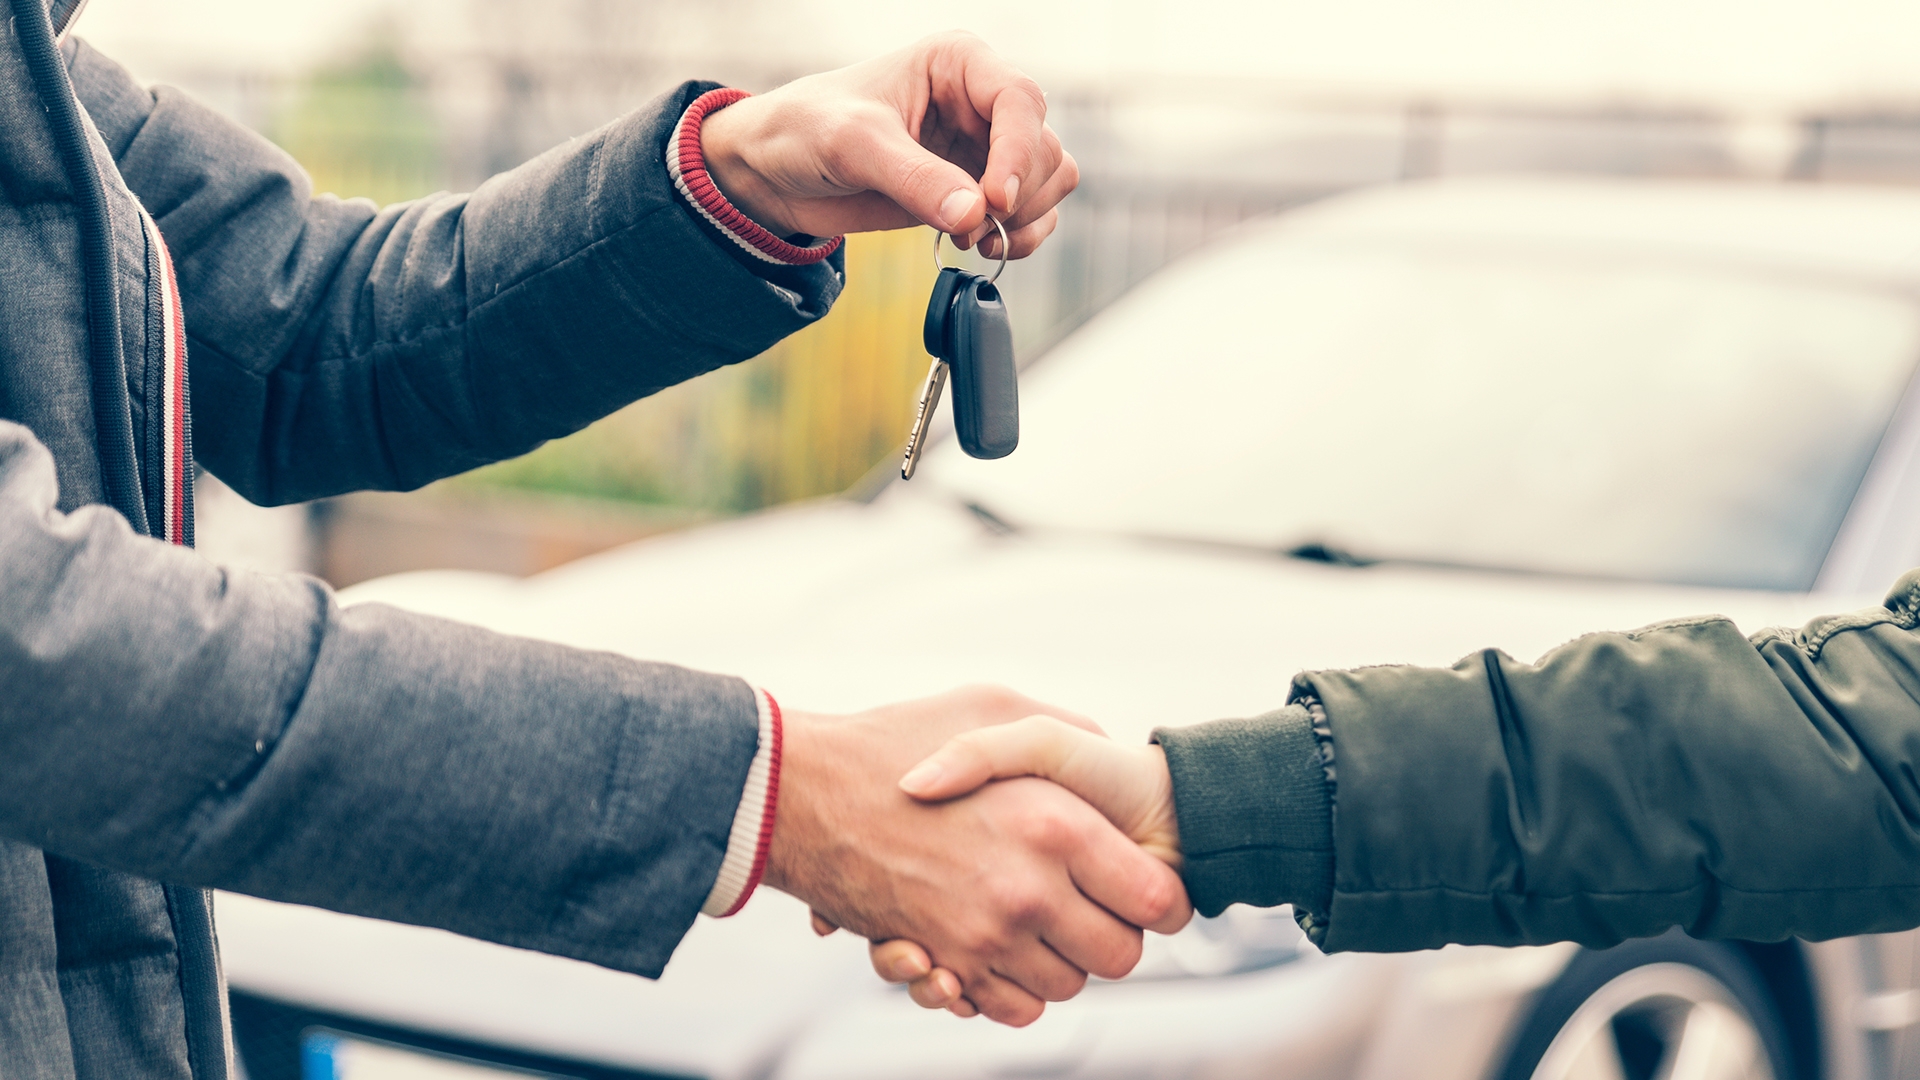 Two people shaking hands and passing car keys in front of vehicle